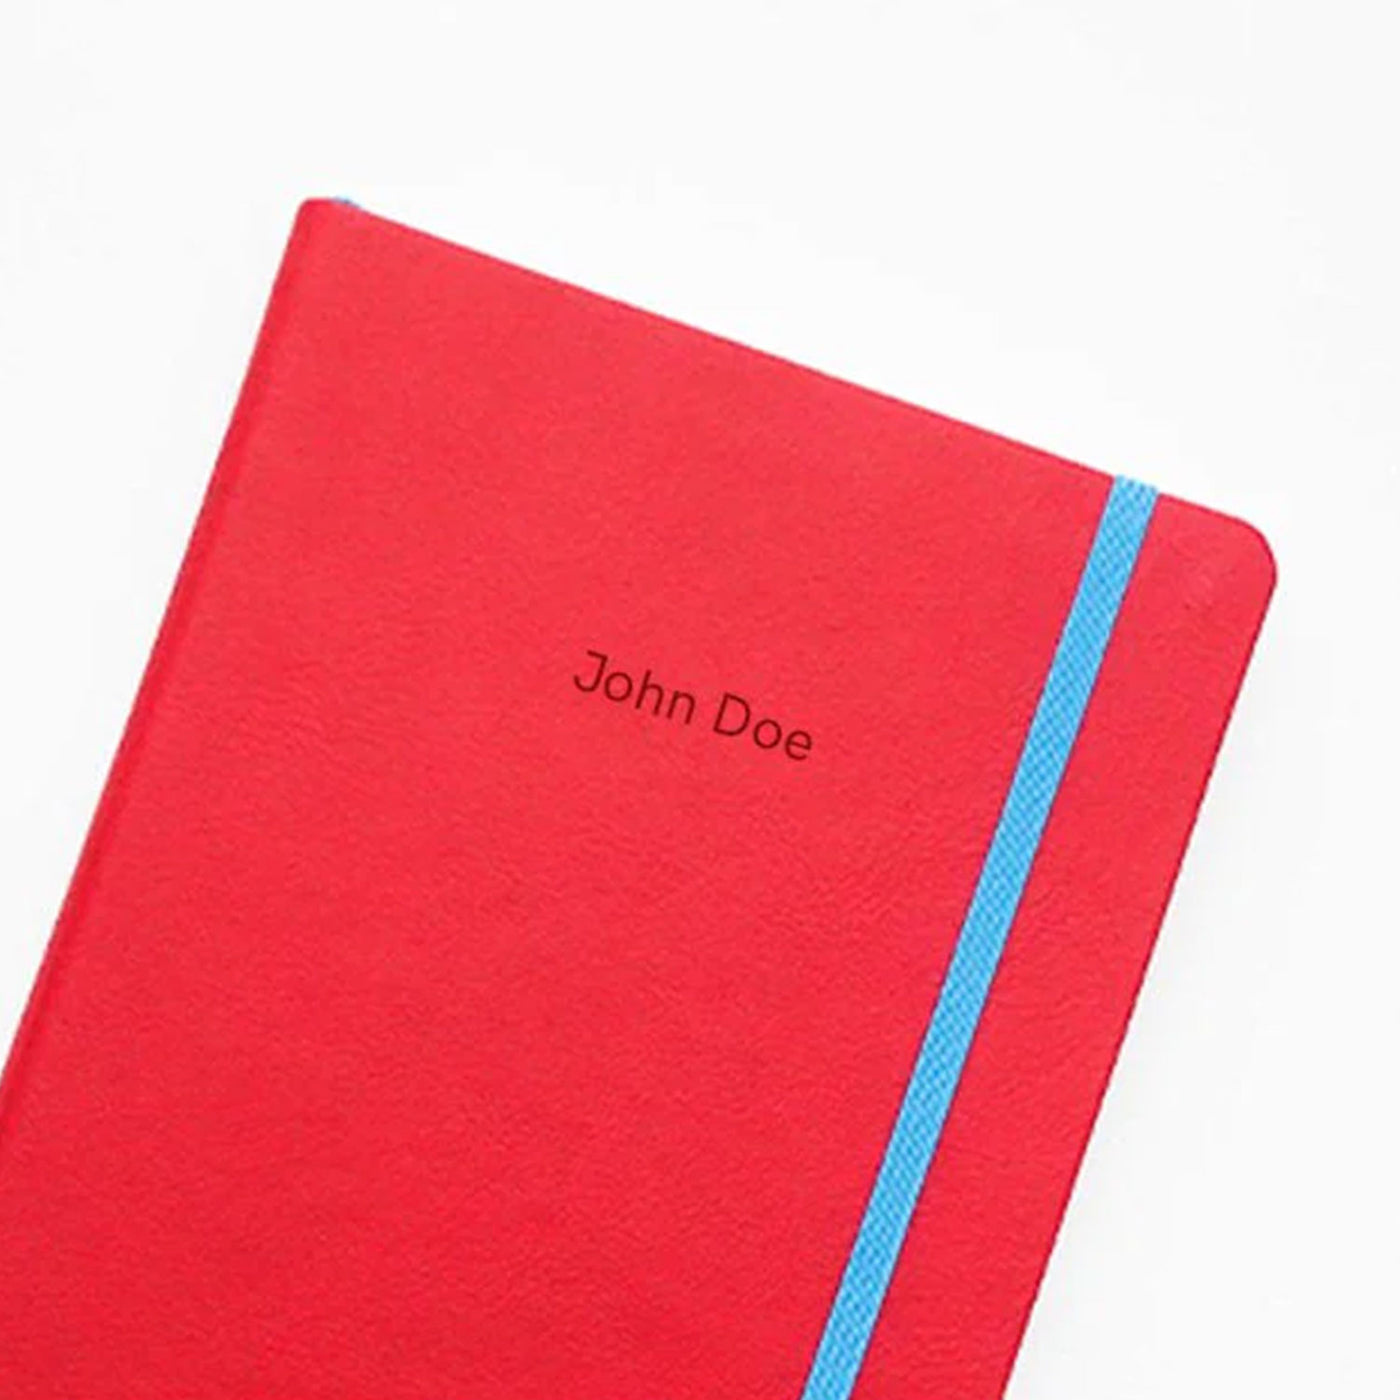 Endless Recorder Crimson Sky Red Regalia Notebook - A5, Dotted